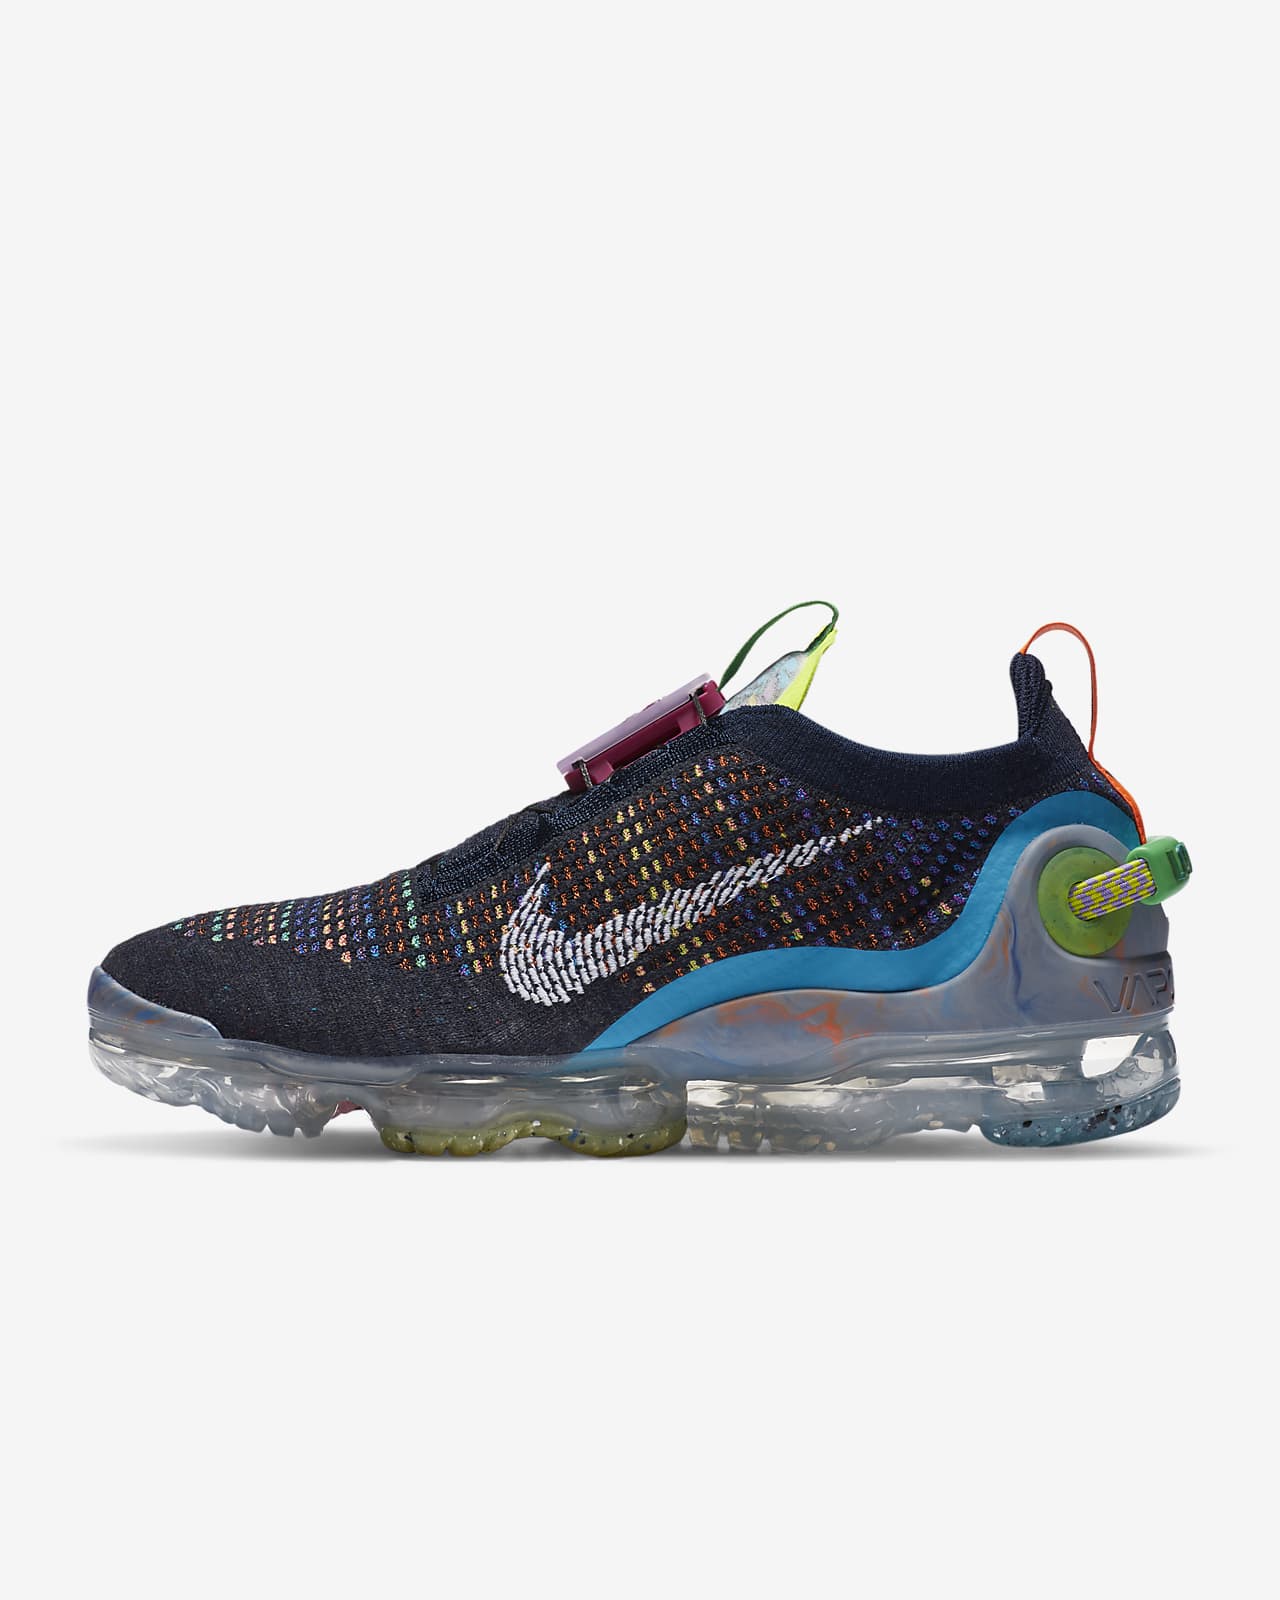 Sneaker News on Twitter The Nike Vapormax 2020 emerges